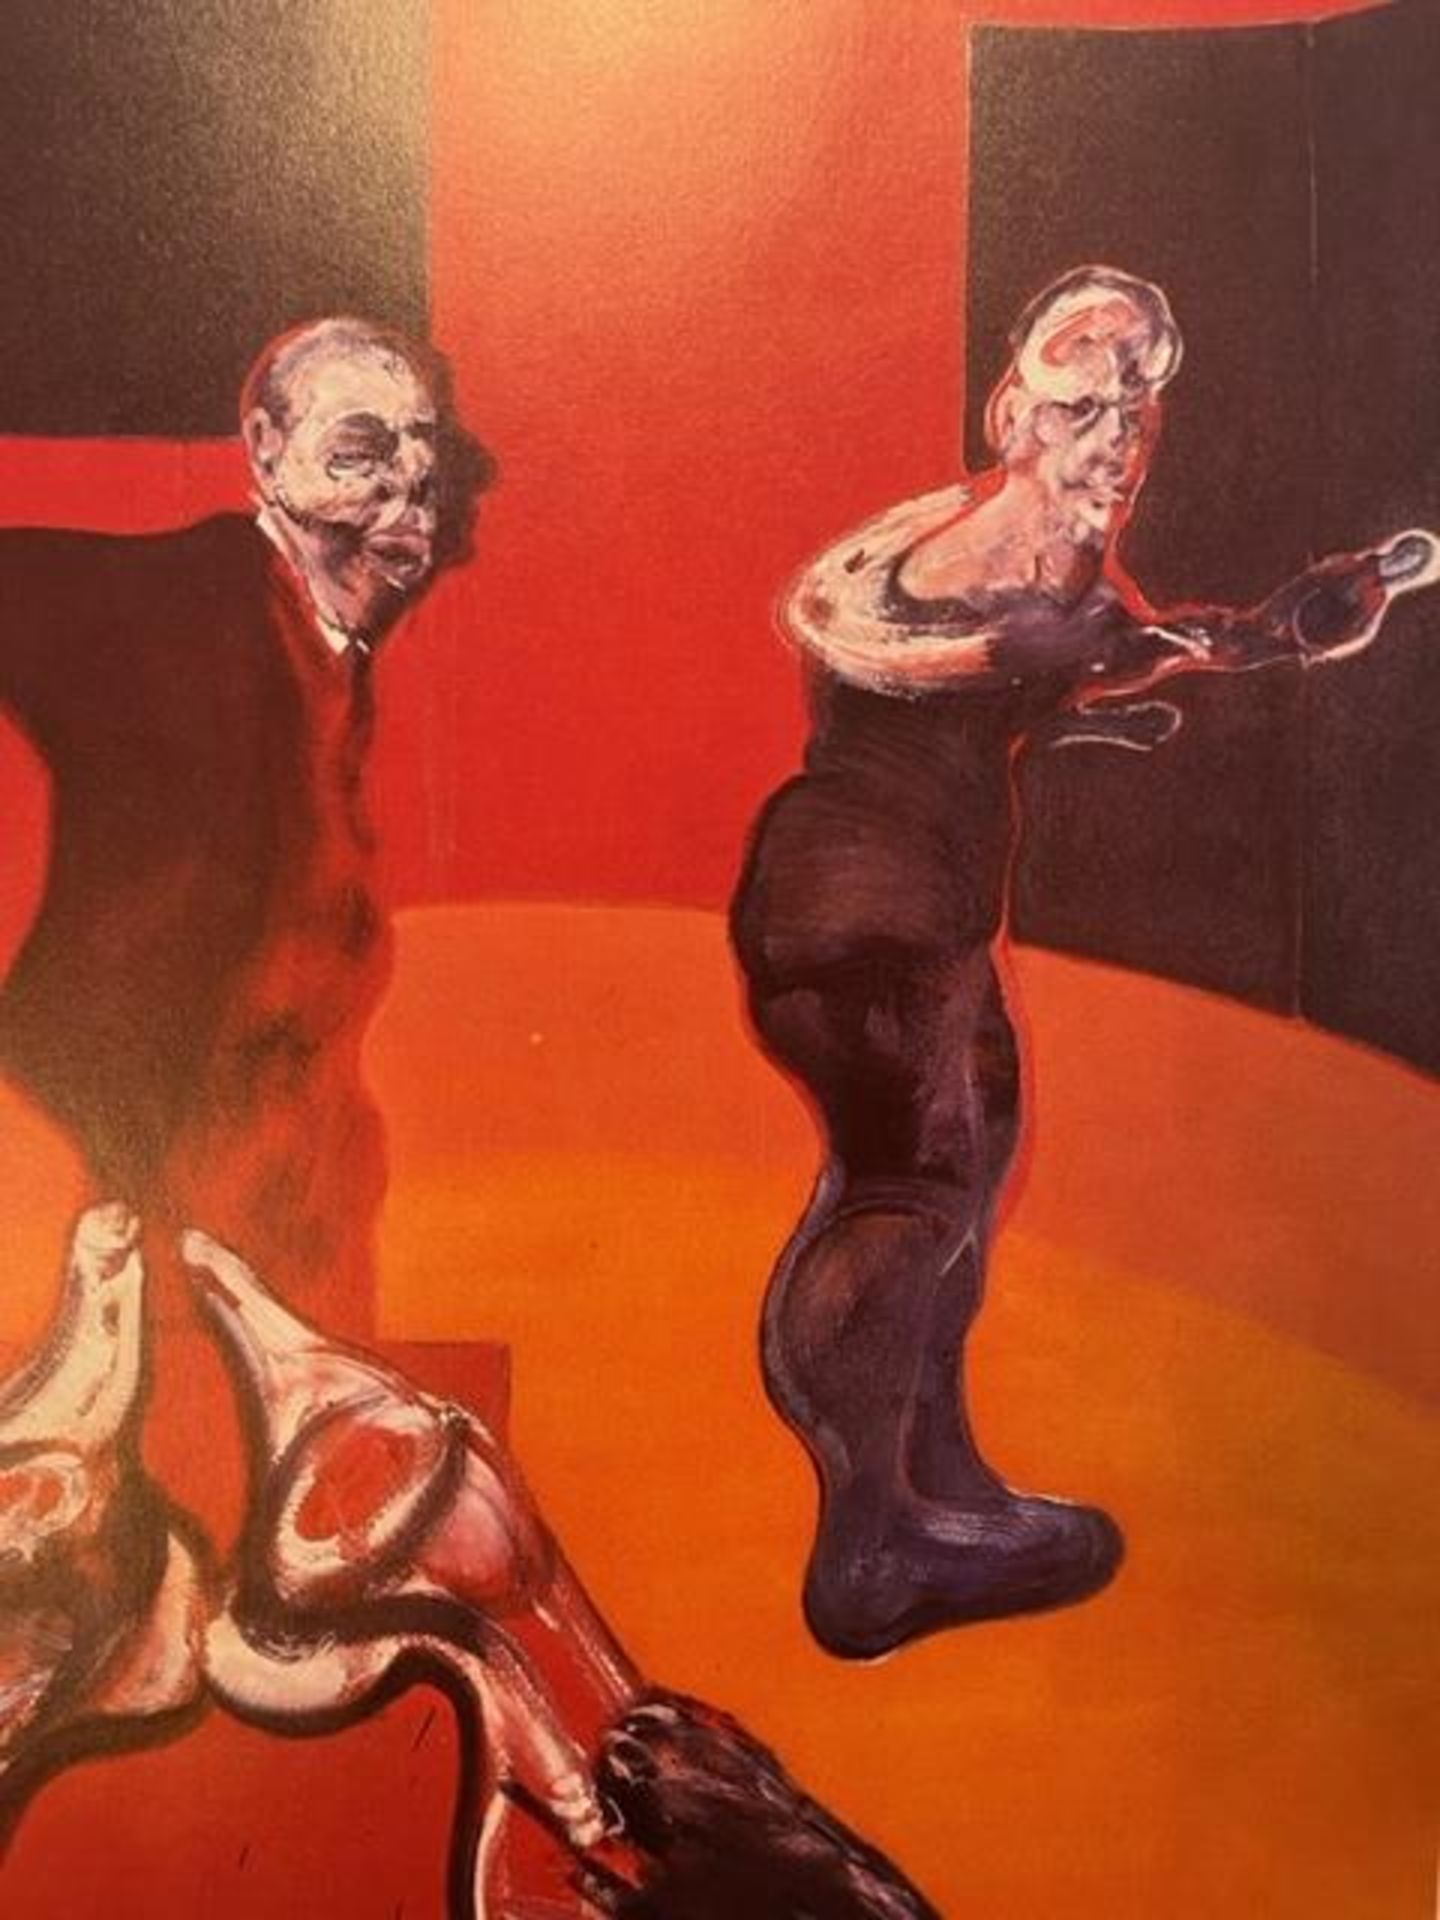 Francis Bacon "Three Studies for a Crucifixion" Print.